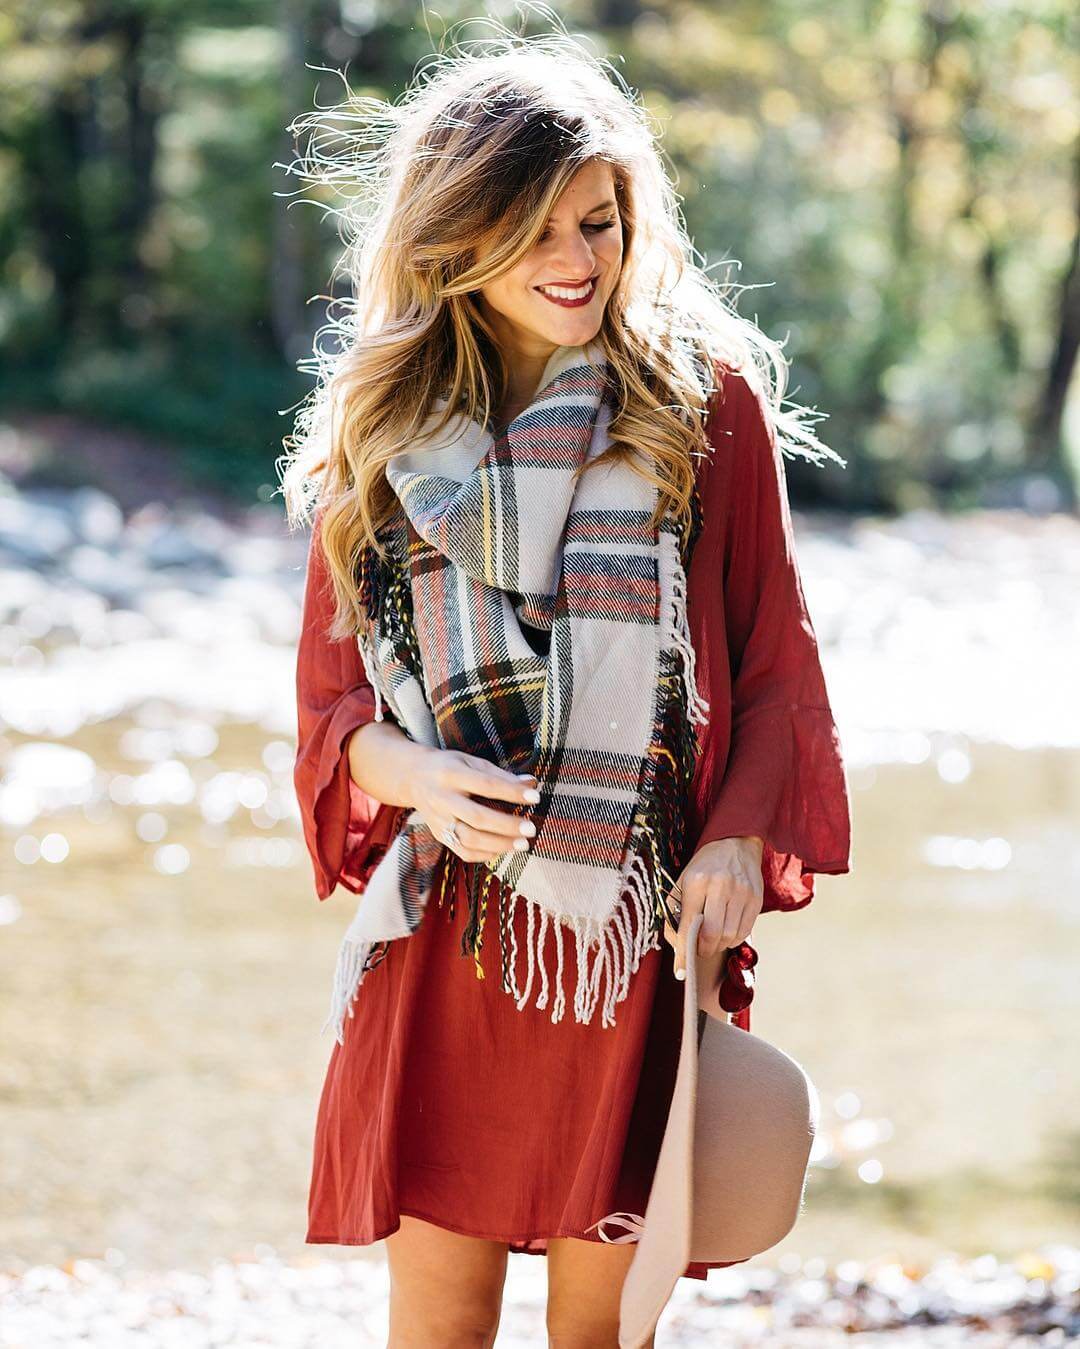 brighton the day styling, red dress, plaid blanket scarf 